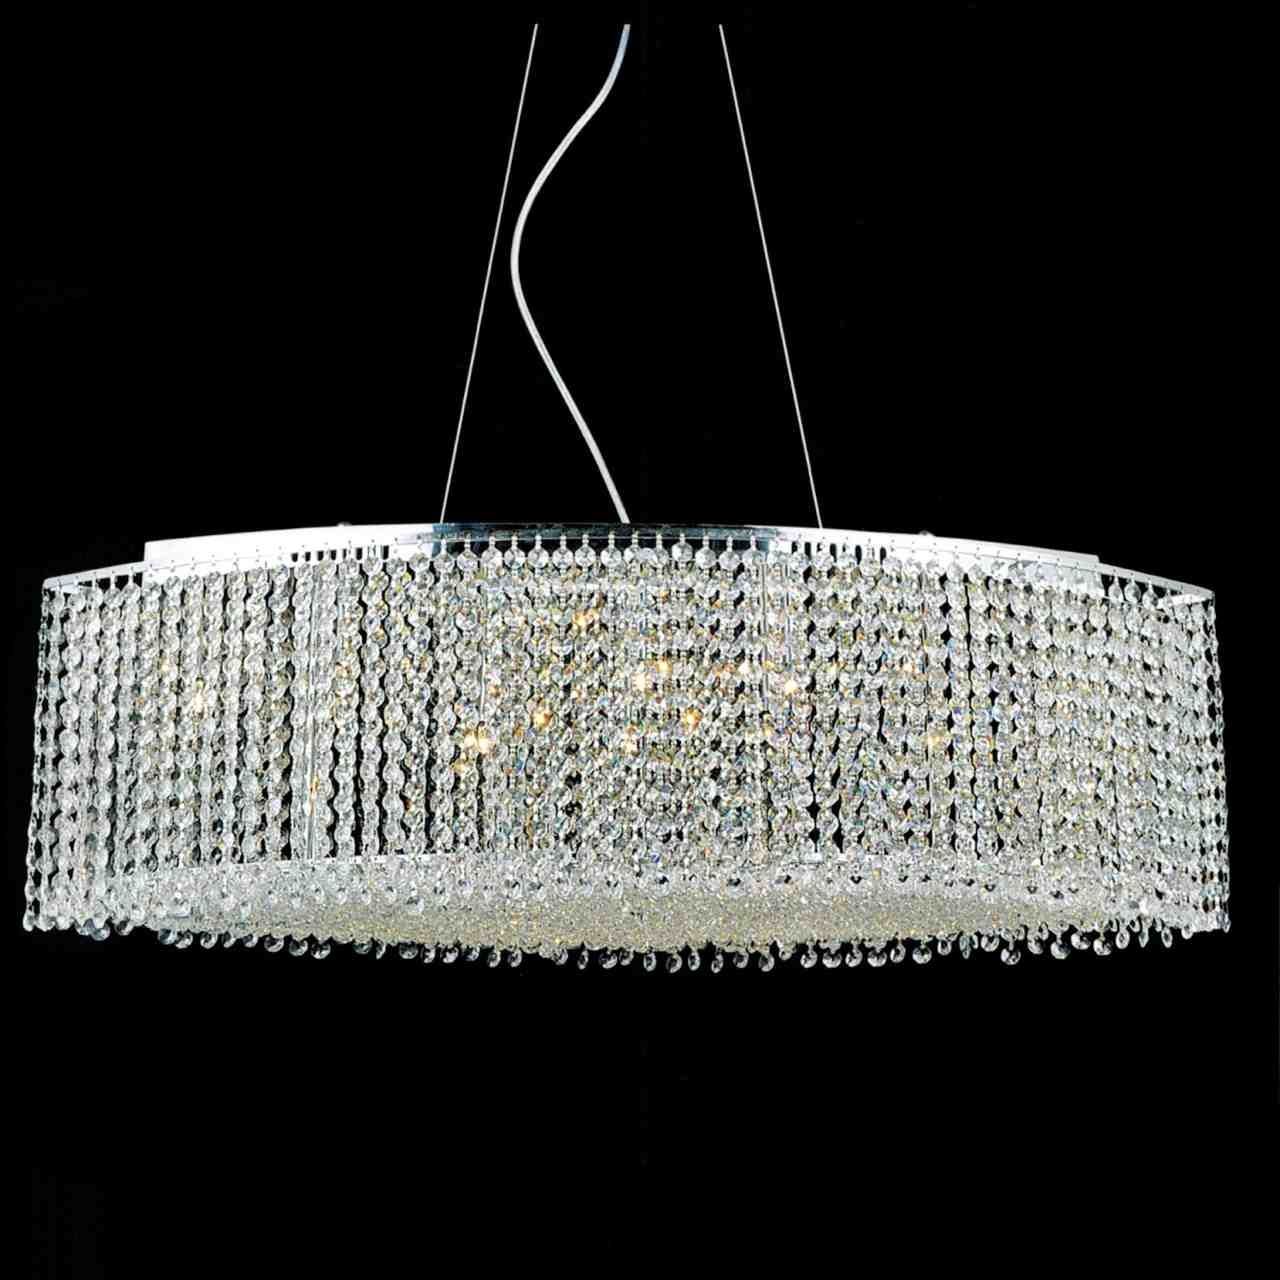 Brizzo Lighting Stores 35 Rainbow Modern Linear Crystal Throughout Purple Crystal Chandelier Lighting (View 3 of 25)